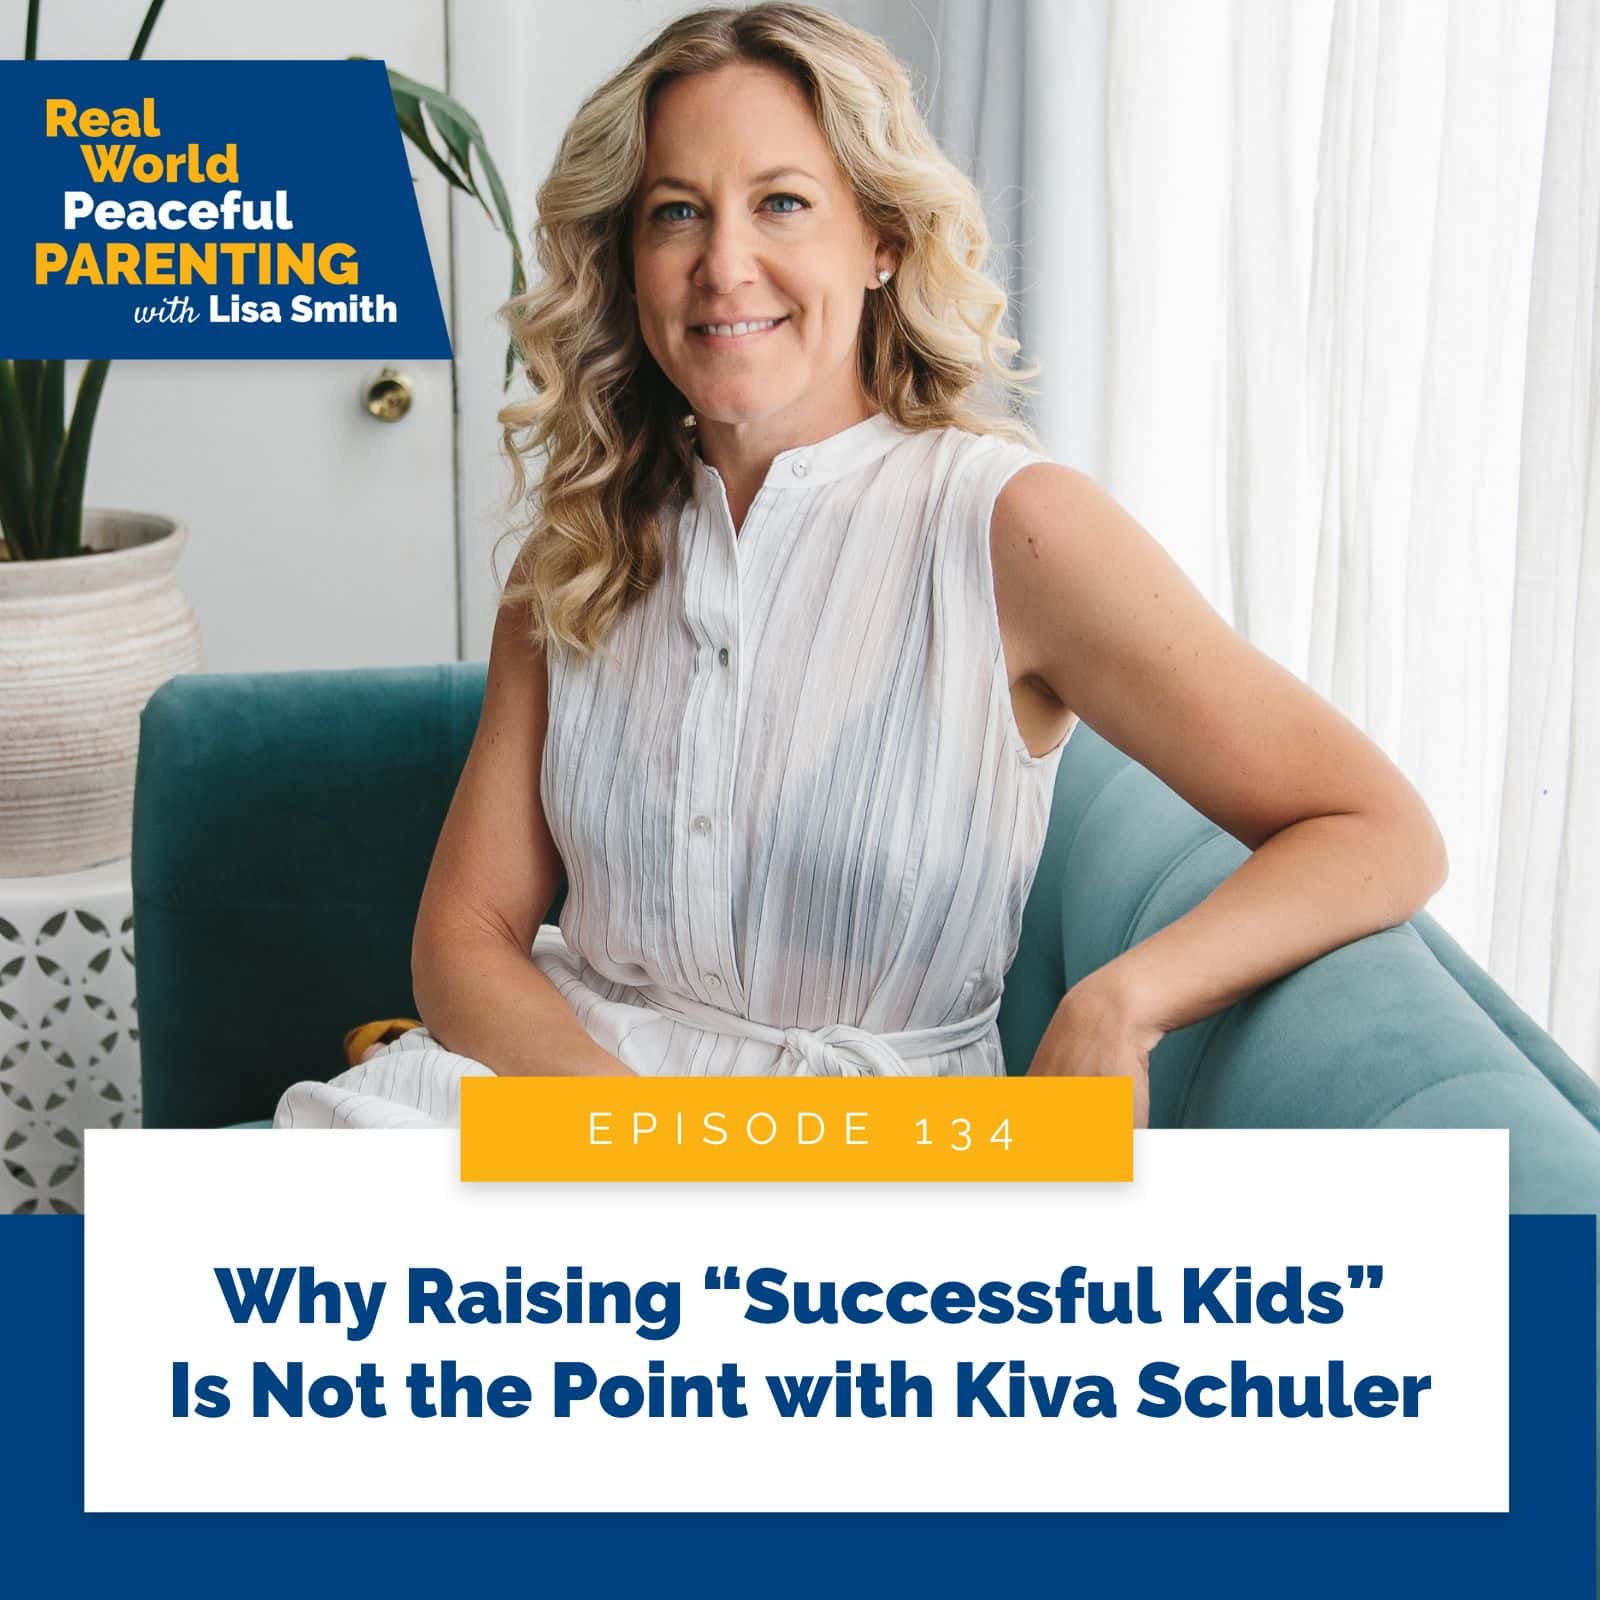 Real World Peaceful Parenting Lisa Smith | Why Raising “Successful Kids” Is Not the Point with Kiva Schuler